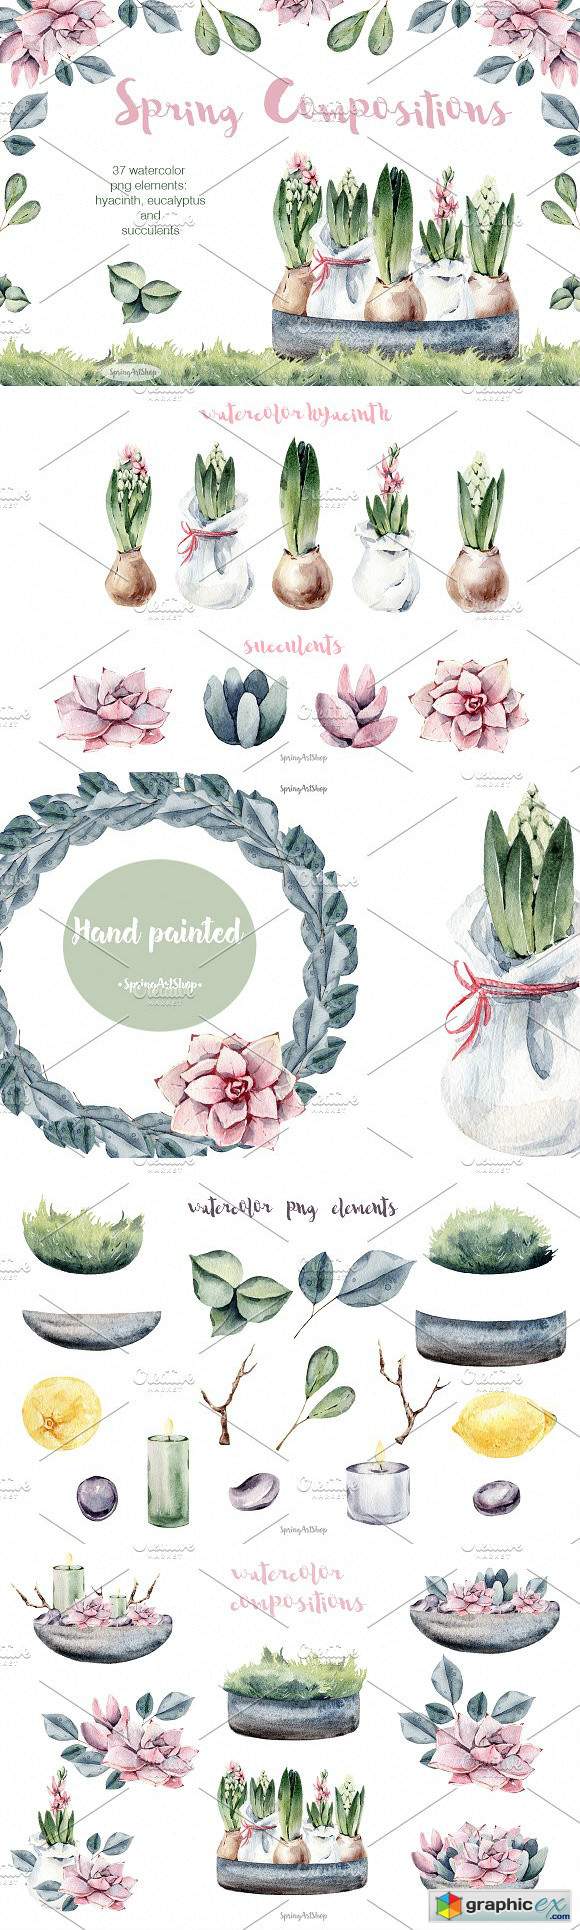 Spring watercolor compositions